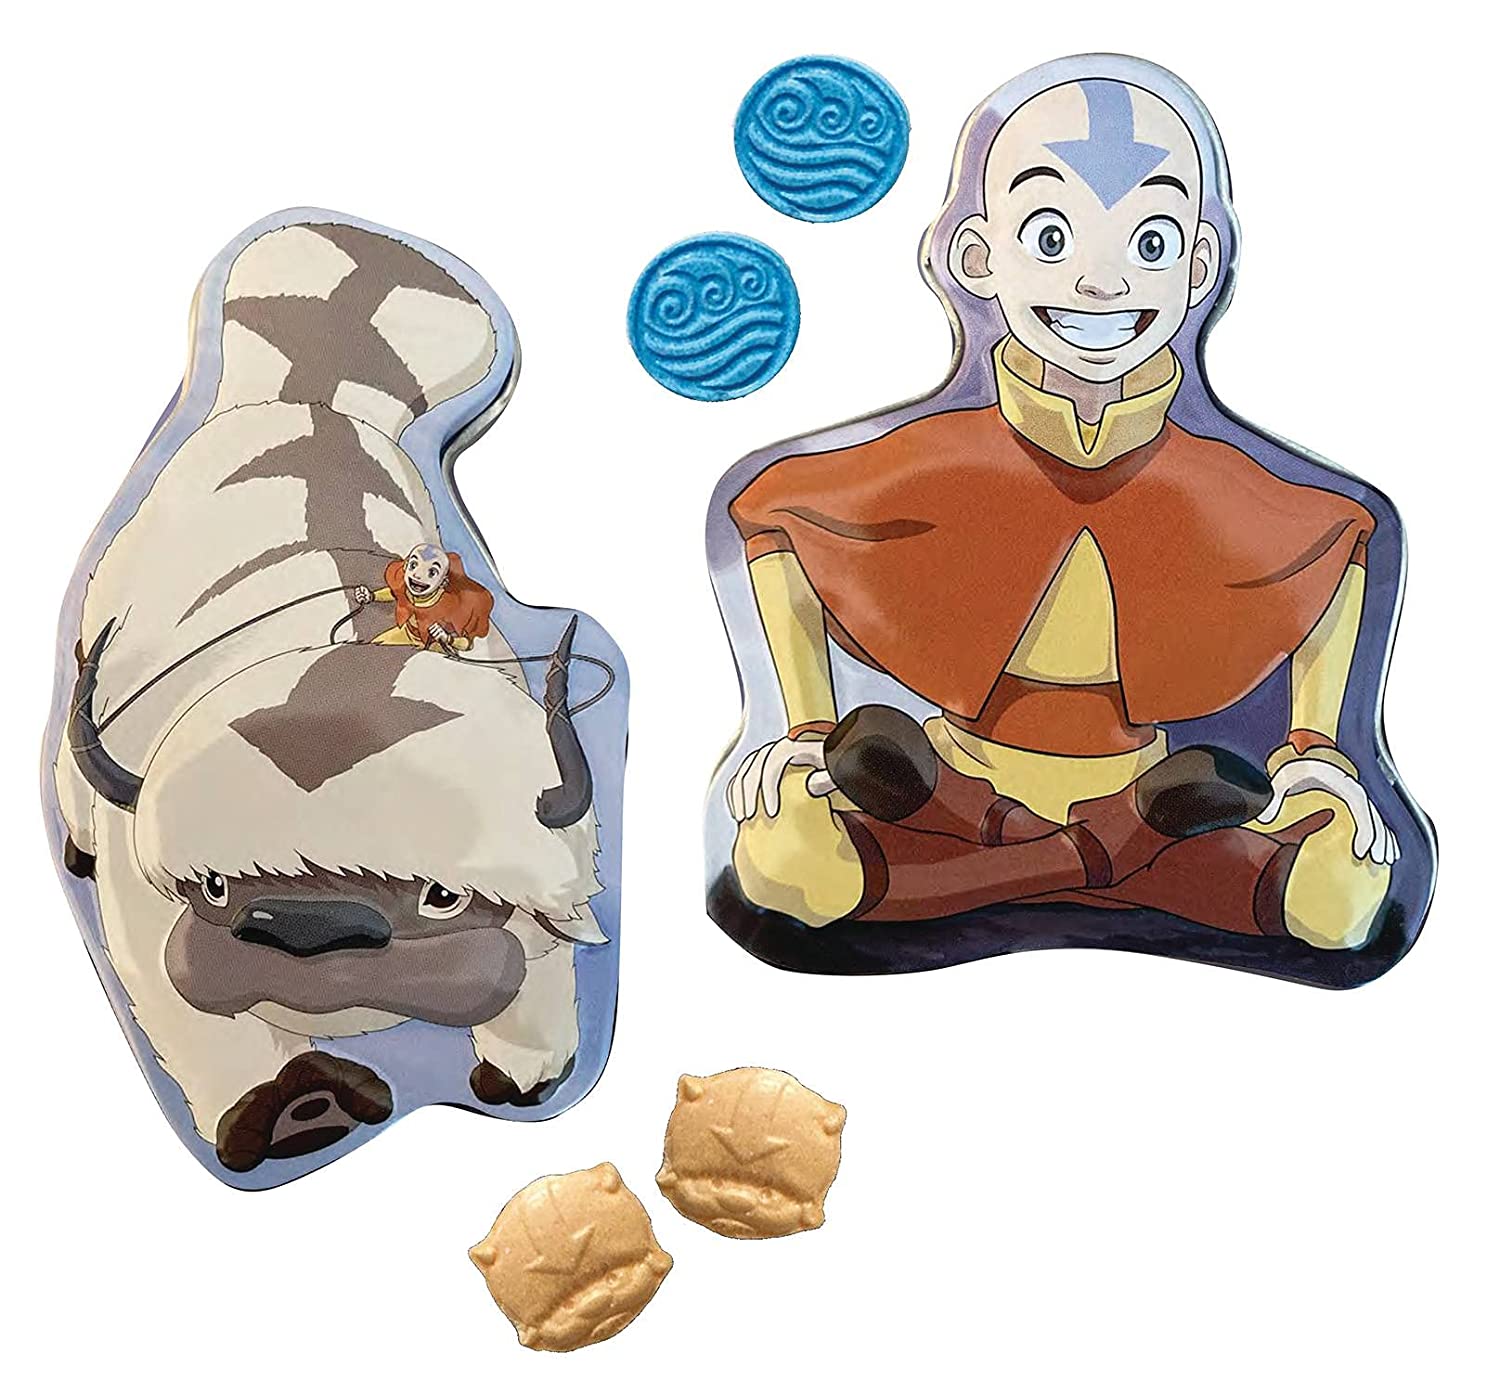 Avatar: The Last Airbender Sours Candy Orange/Blue Reaspberry